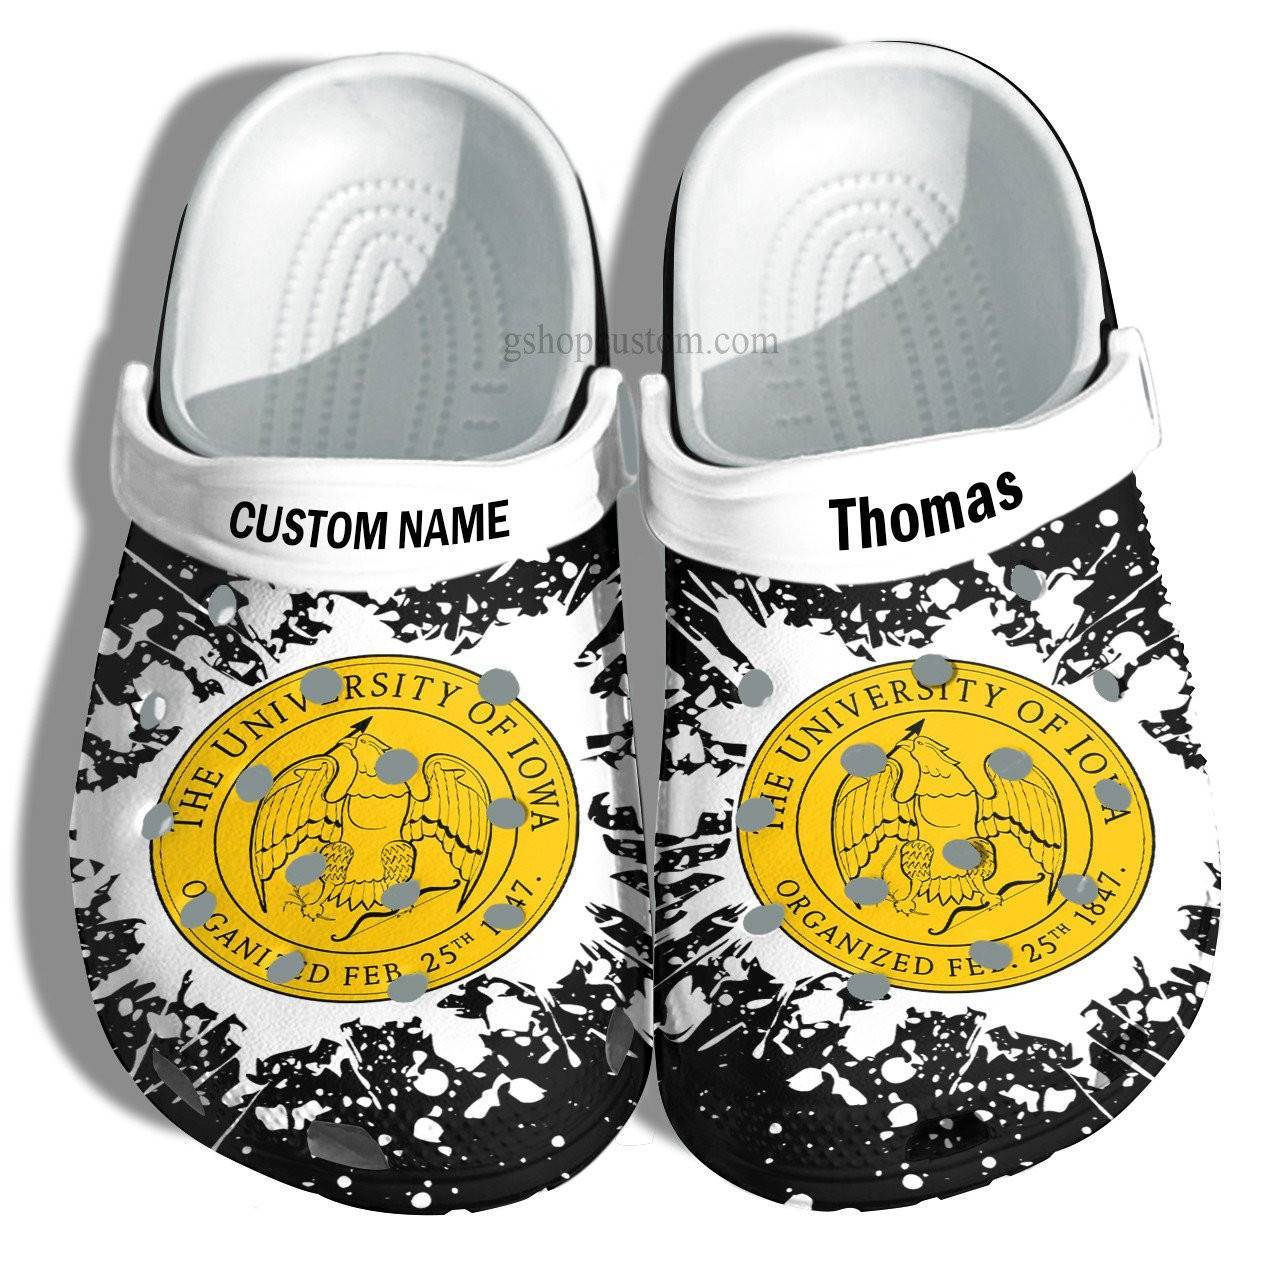 University Of Iowa Graduation Gifts Croc Shoes Customize – Admission Gift Crocss Shoes